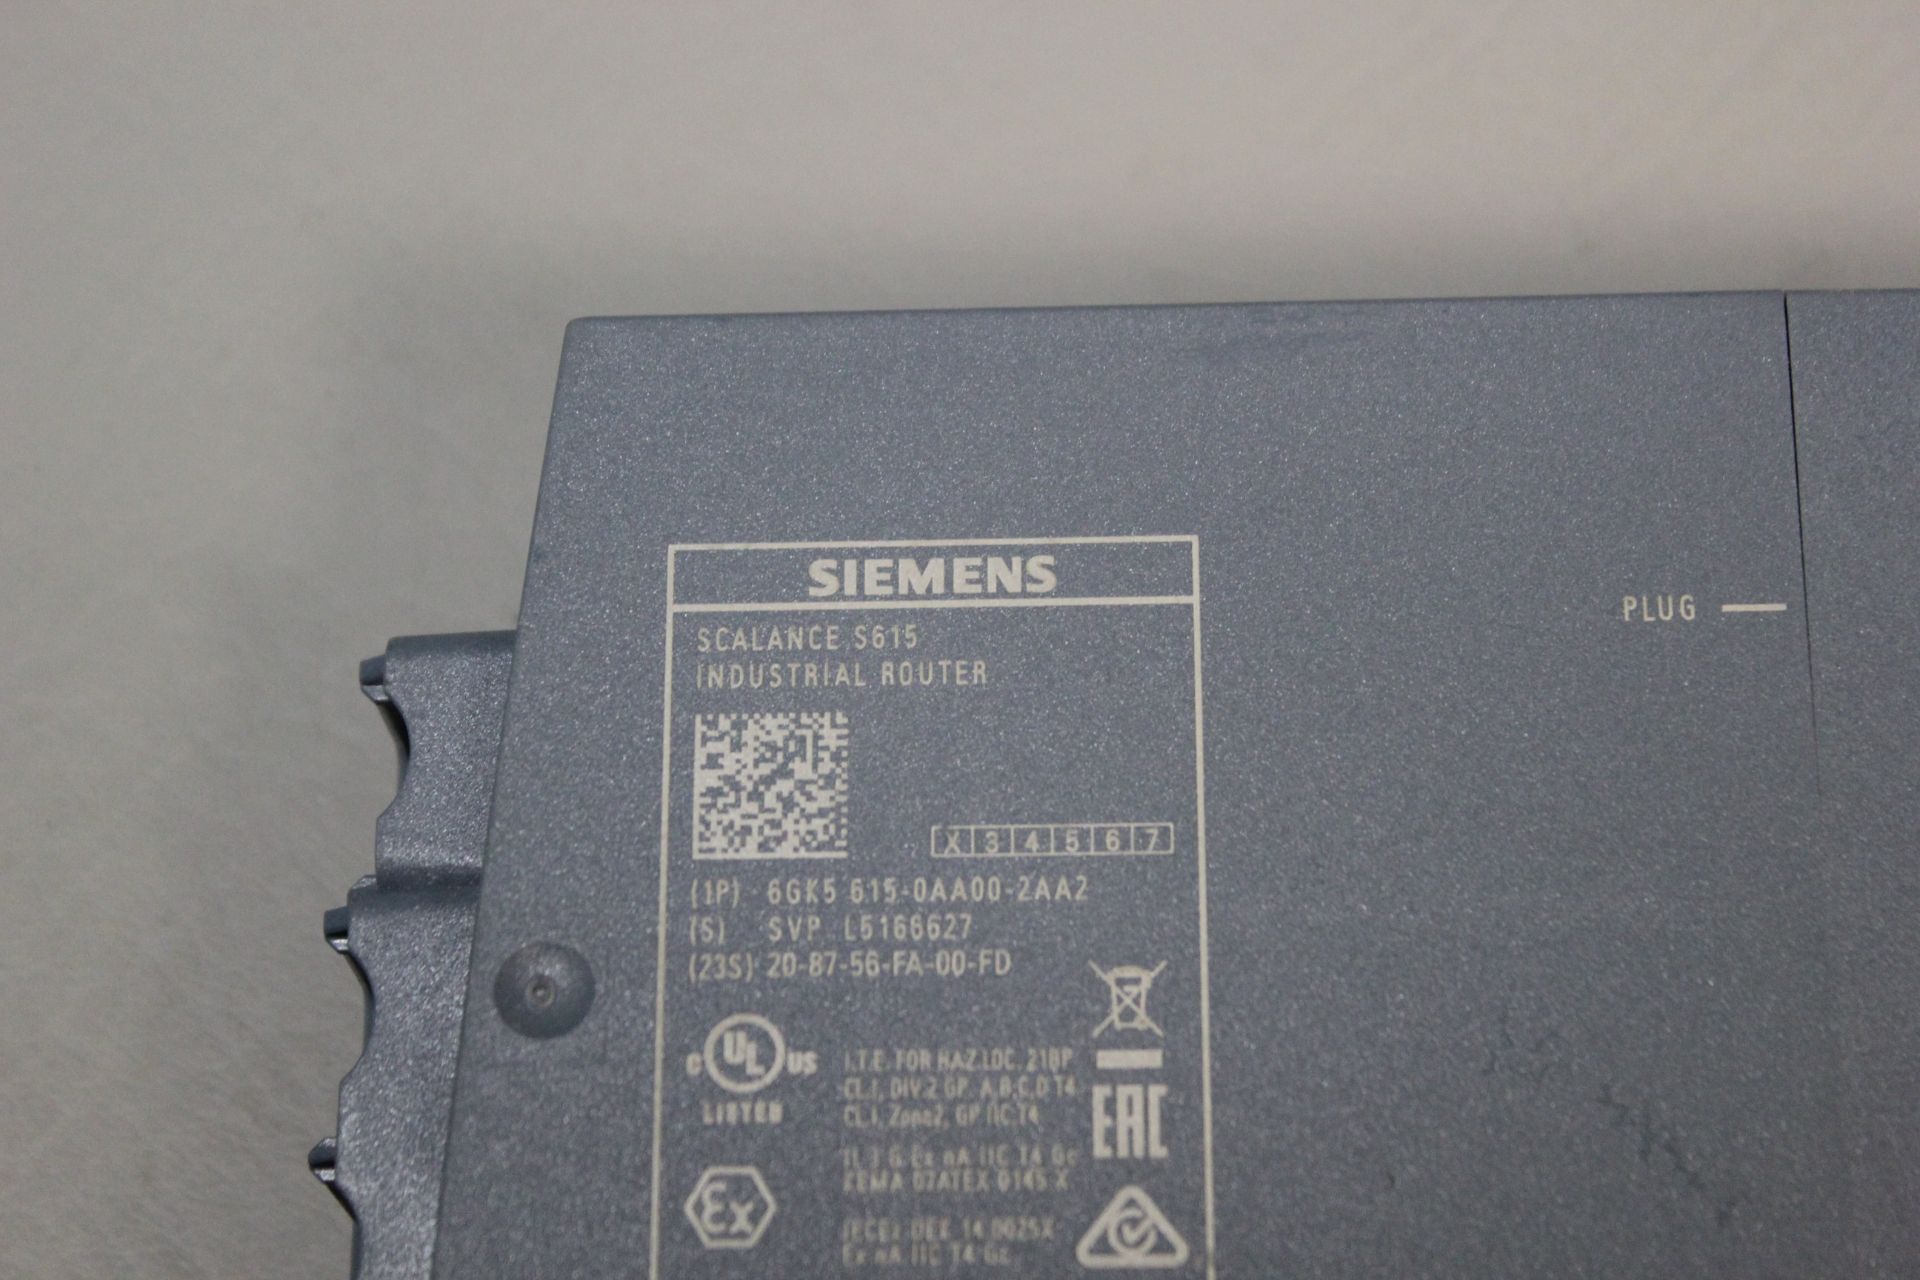 SIEMENS INDUSTRIAL ROUTER - Image 3 of 3